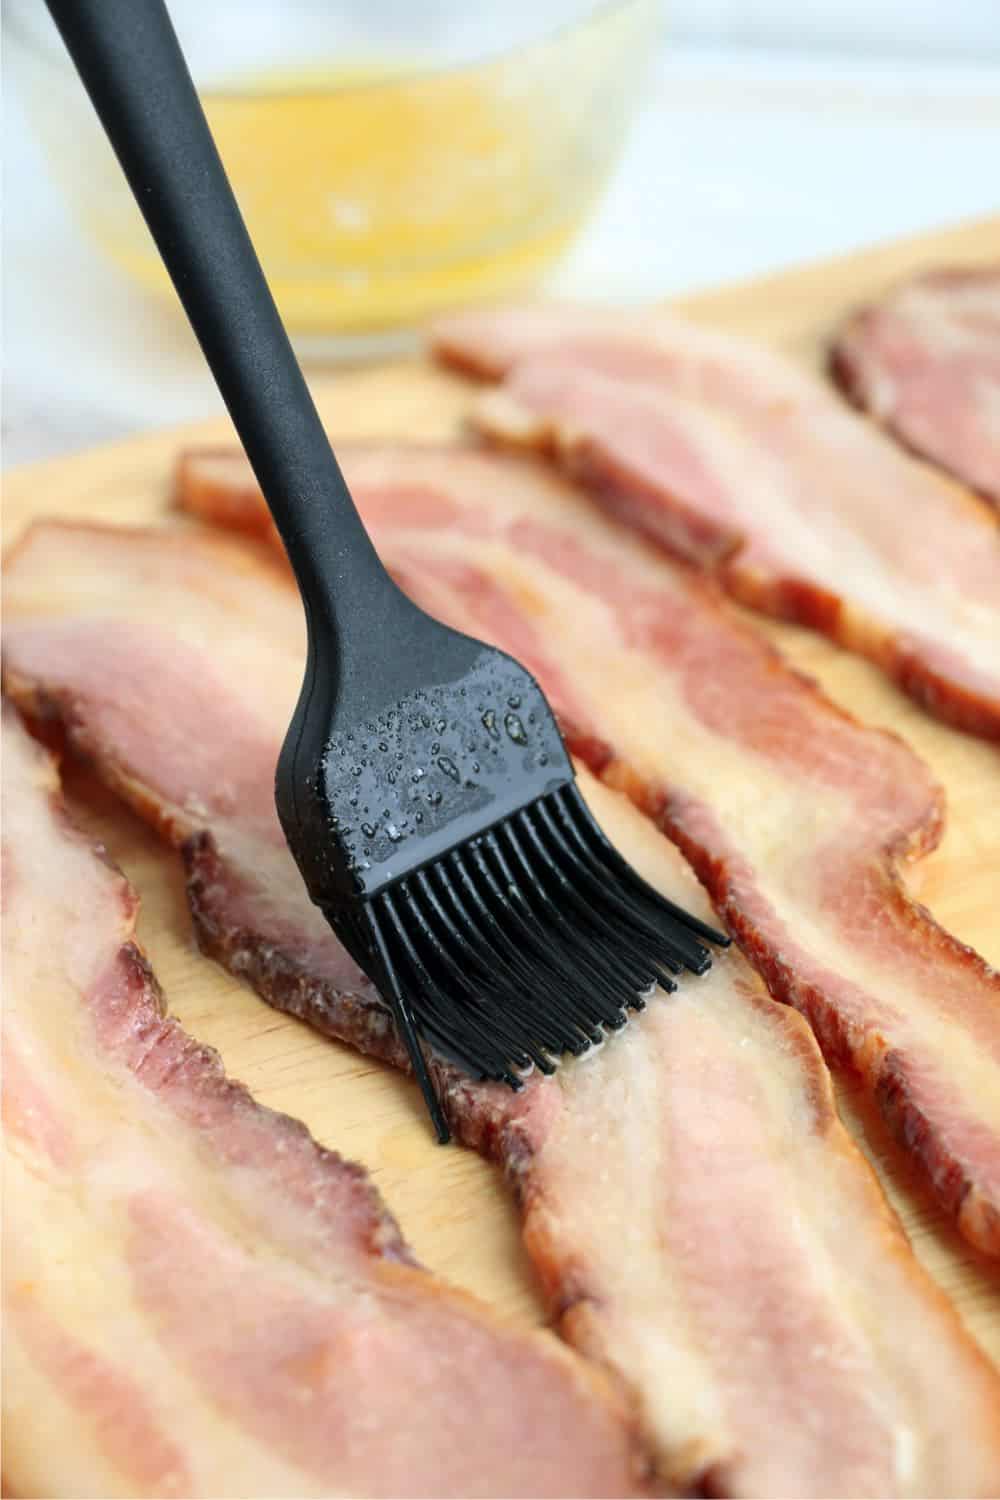 Melted butter, salt and garlic powder mixture being brushed onto strips of bacon